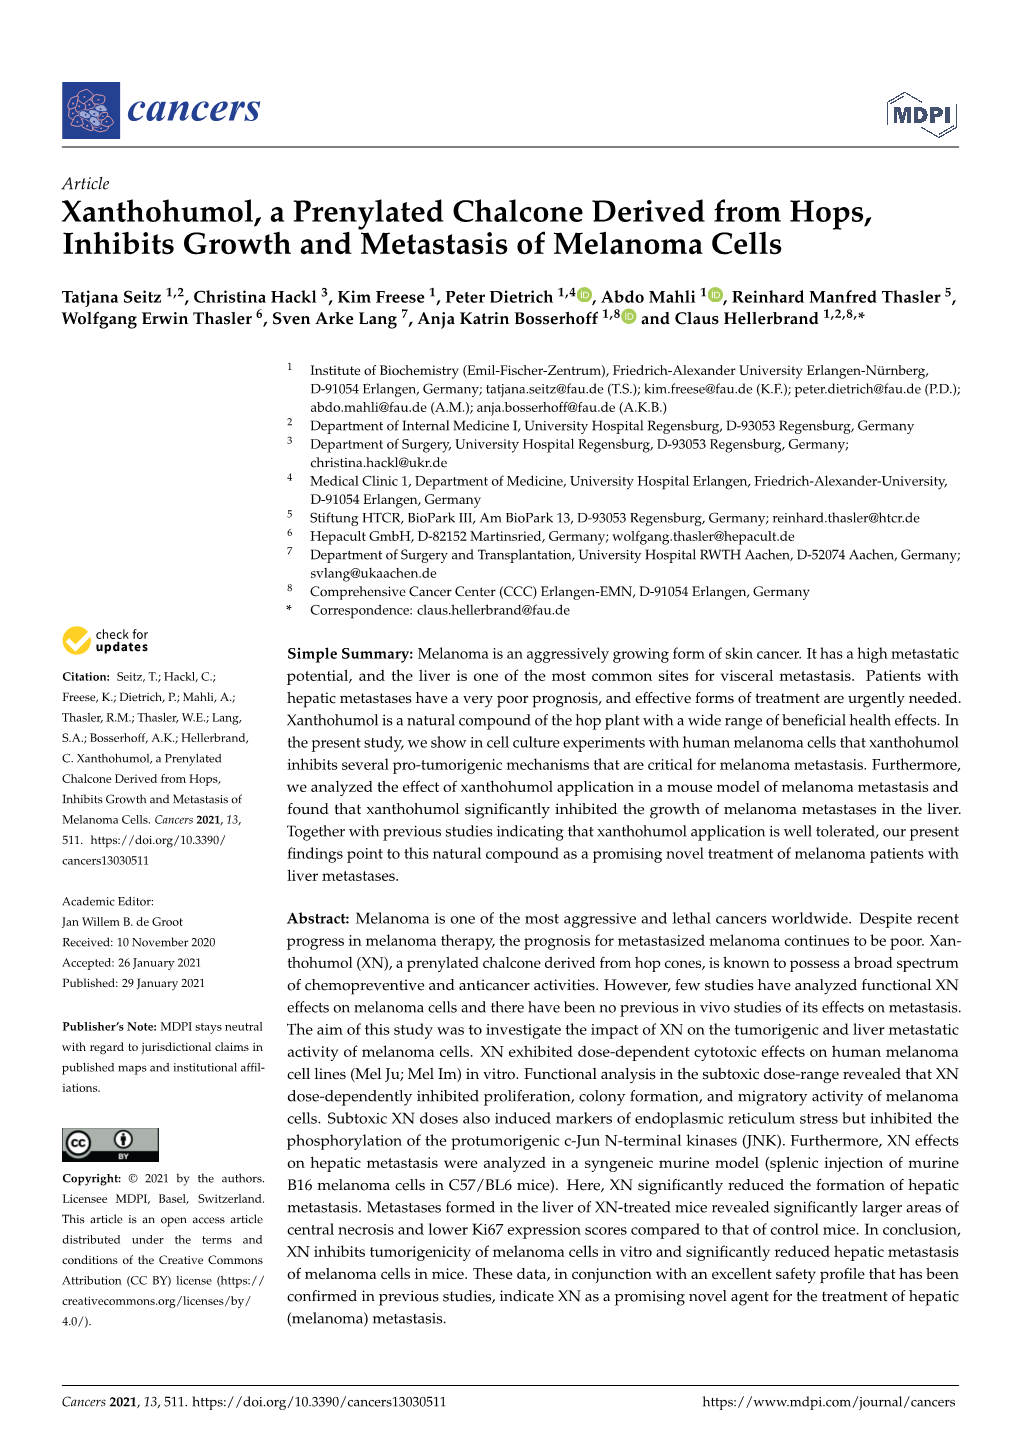 Xanthohumol, a Prenylated Chalcone Derived from Hops, Inhibits Growth and Metastasis of Melanoma Cells